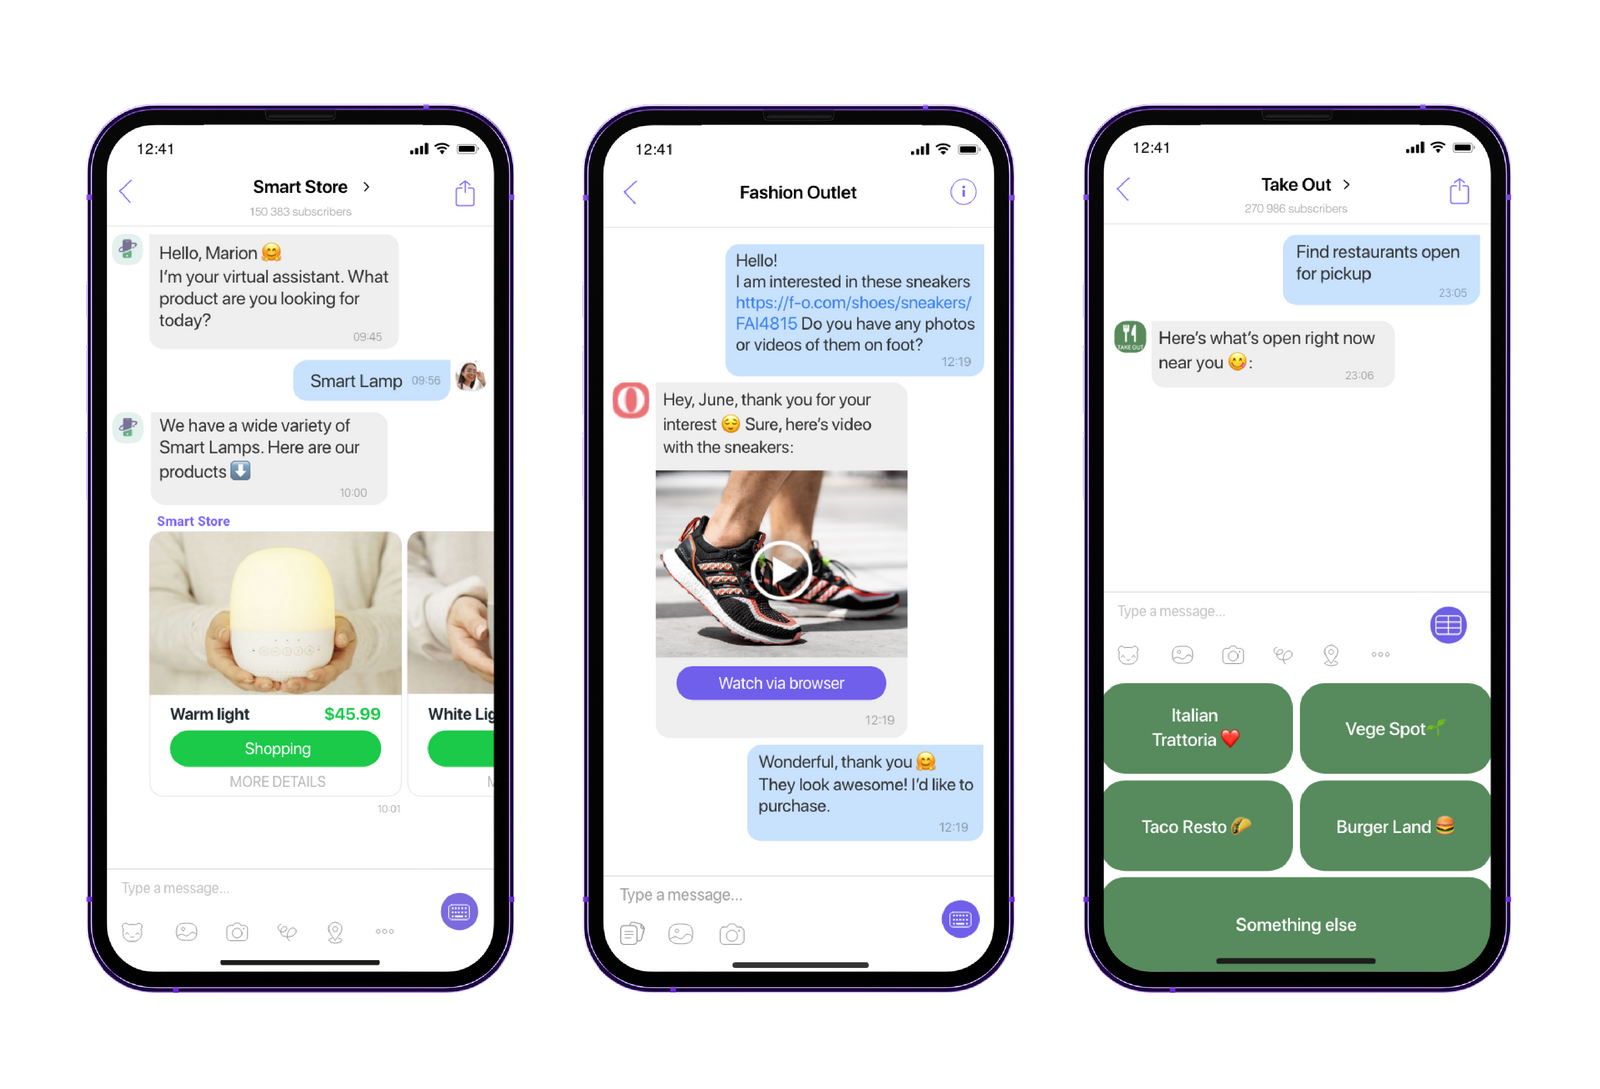 Examples of c commerce chatbots and business messages via the Viber app